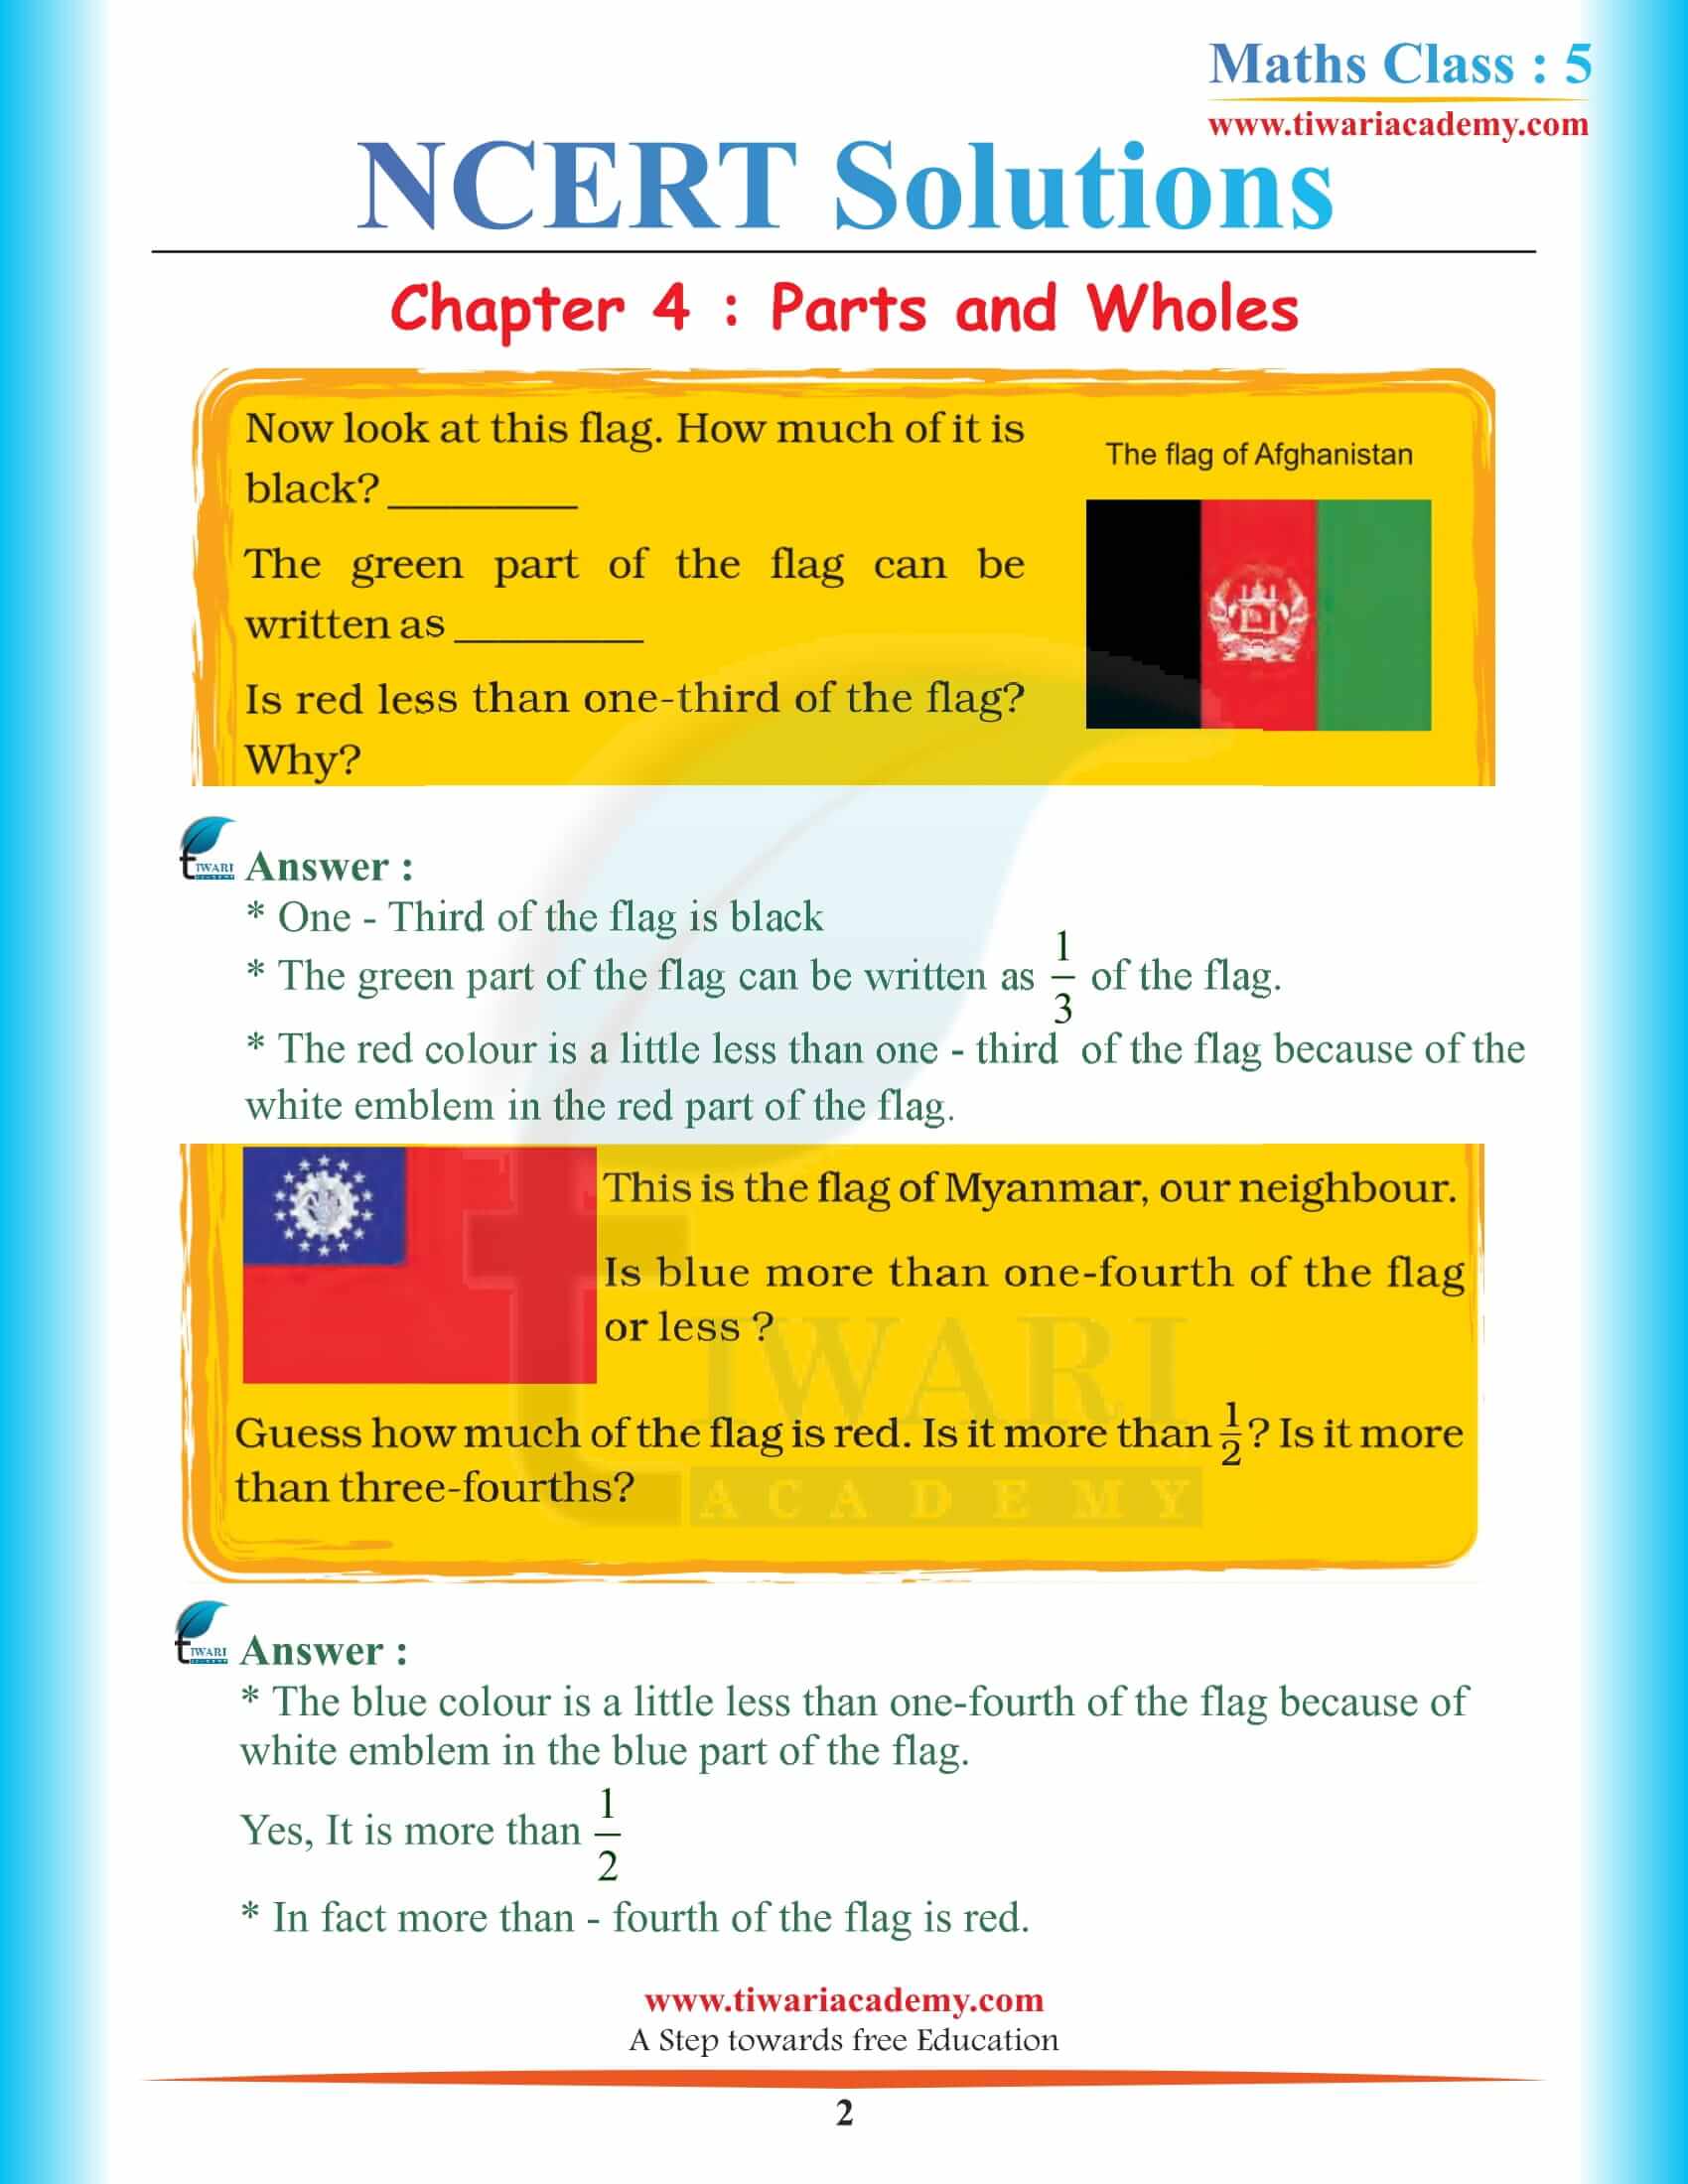 NCERT Solutions for Class 5 Maths Chapter 4 in PDF